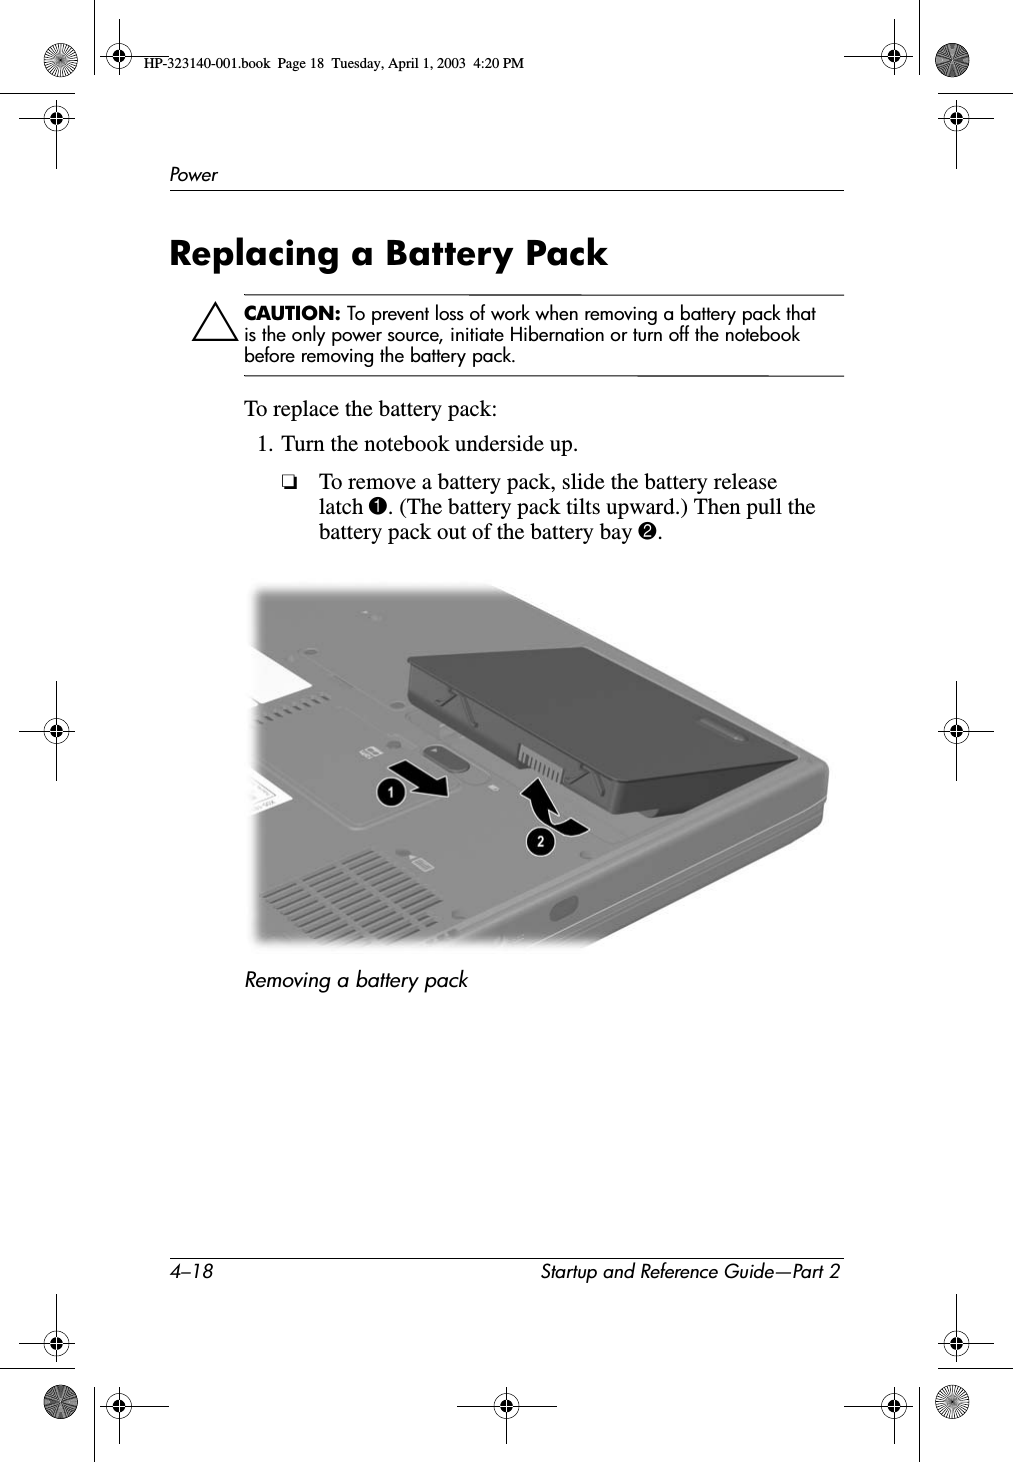 4–18 Startup and Reference Guide—Part 2PowerReplacing a Battery PackÄCAUTION: To prevent loss of work when removing a battery pack that is the only power source, initiate Hibernation or turn off the notebook before removing the battery pack.To replace the battery pack:1. Turn the notebook underside up.❏To remove a battery pack, slide the battery release latch 1. (The battery pack tilts upward.) Then pull the battery pack out of the battery bay 2.Removing a battery packHP-323140-001.book  Page 18  Tuesday, April 1, 2003  4:20 PM